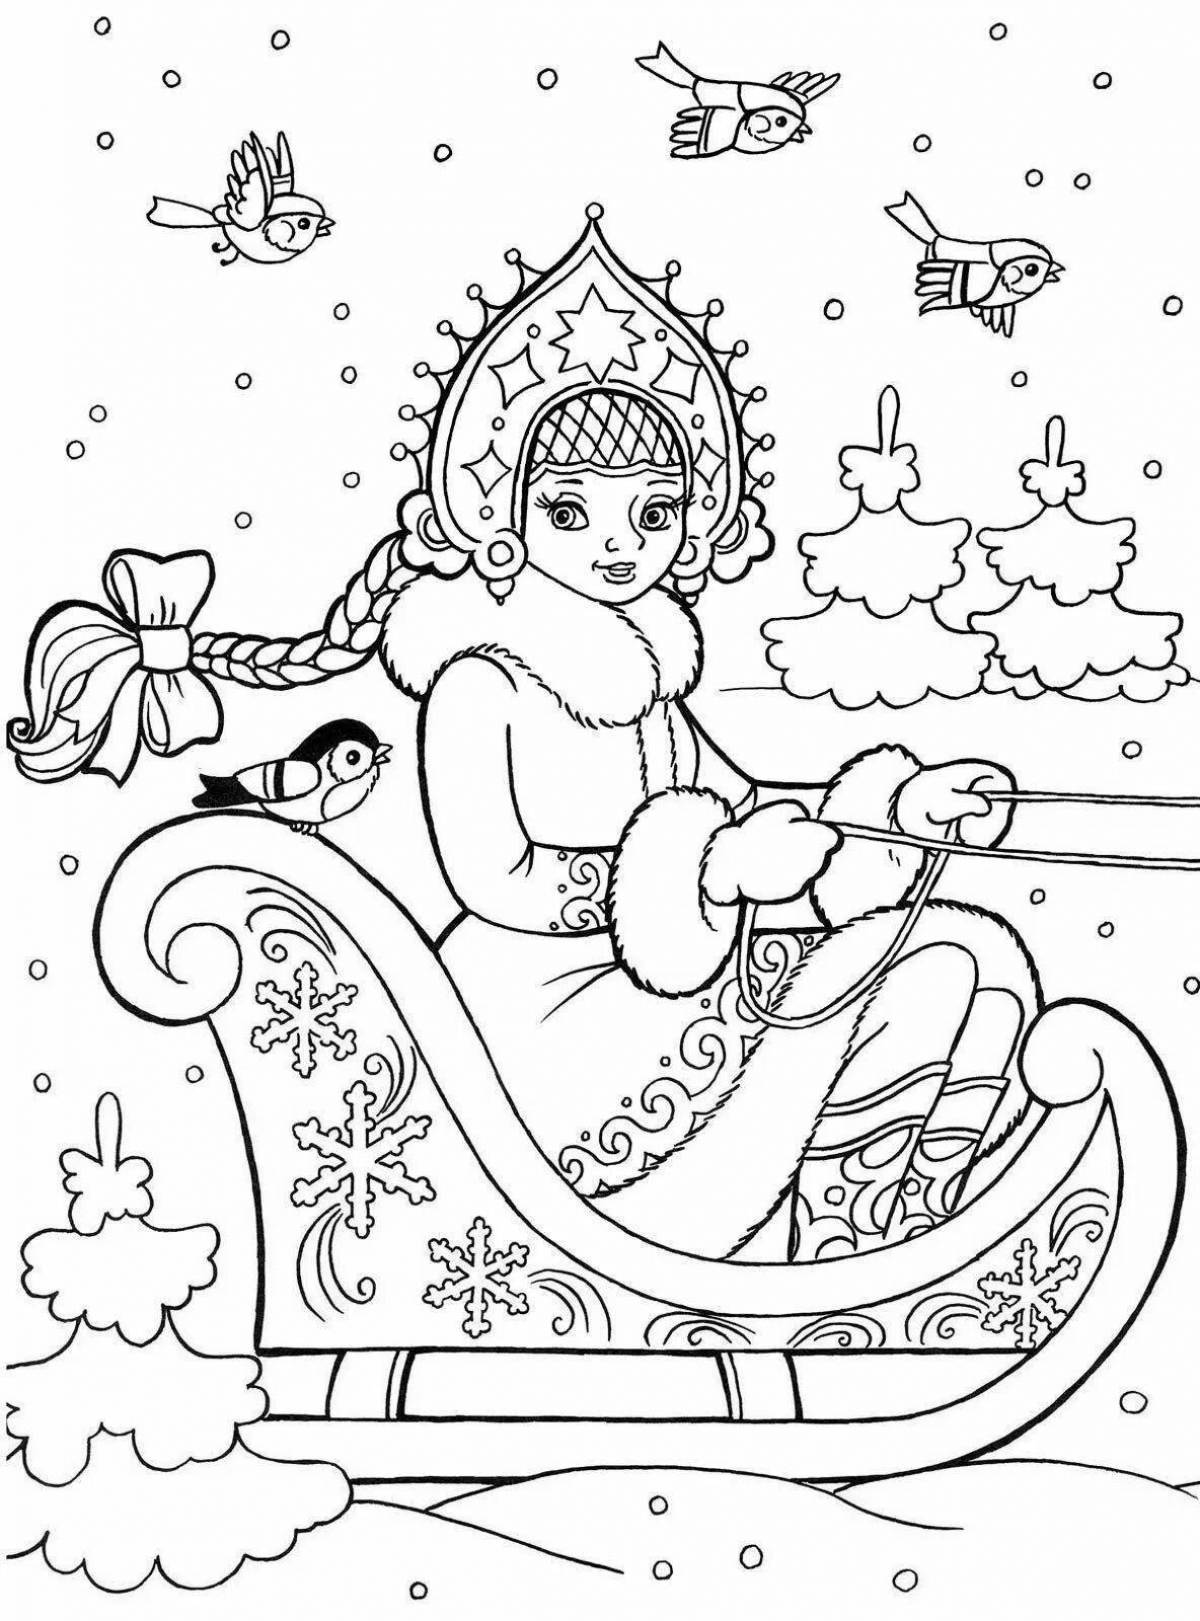 Serendipitous coloring page snow maiden picture